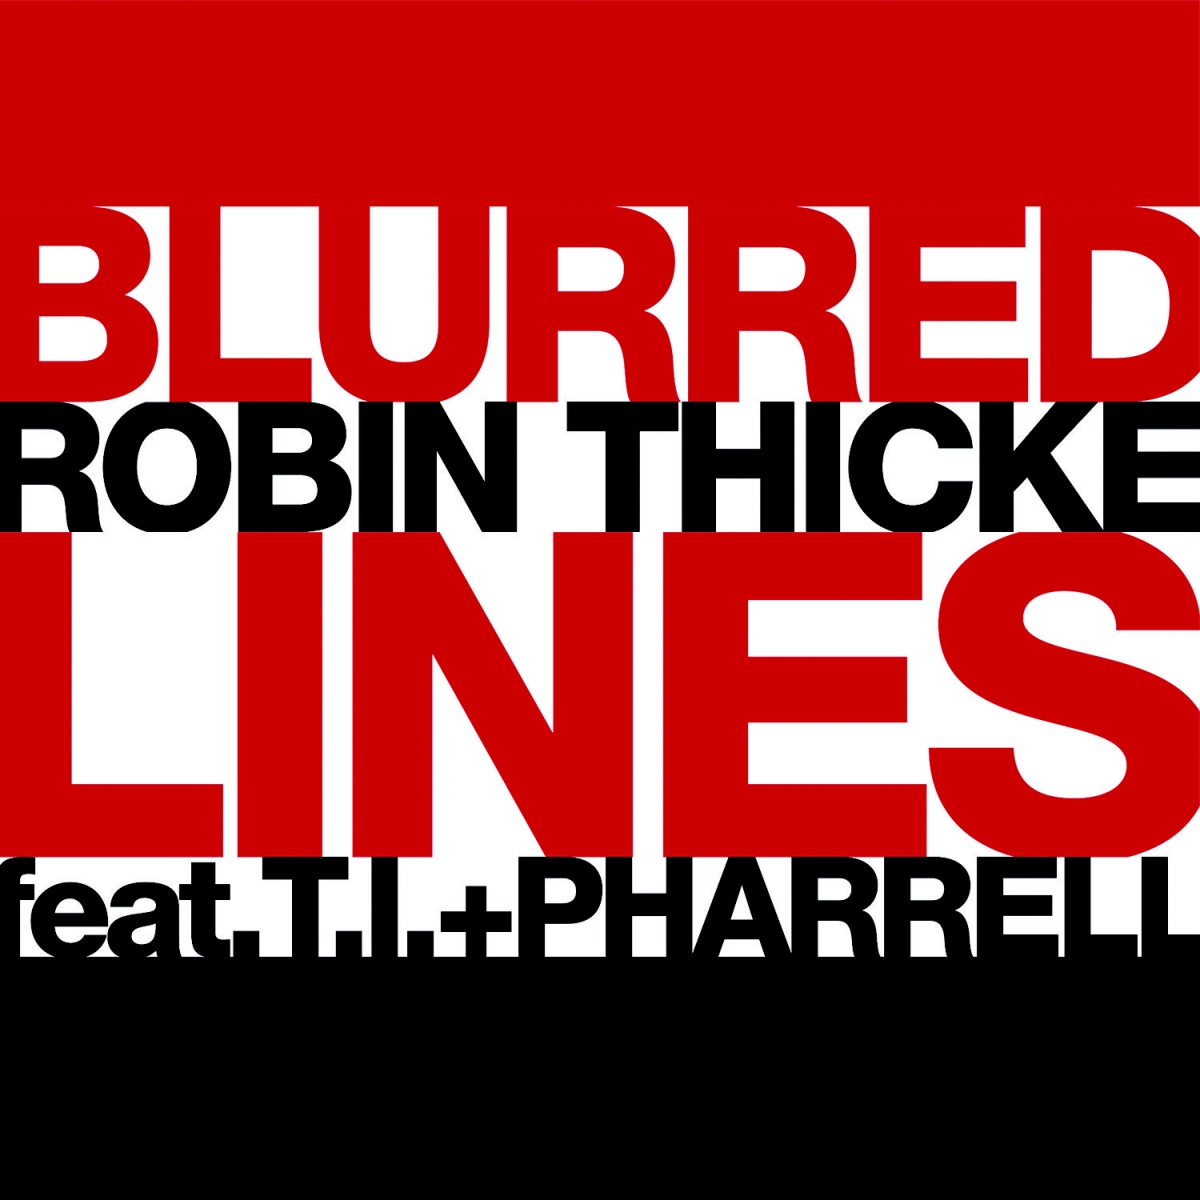 ROBIN THICKE - Blurred Lines (feat. T.I. & Pharrell)